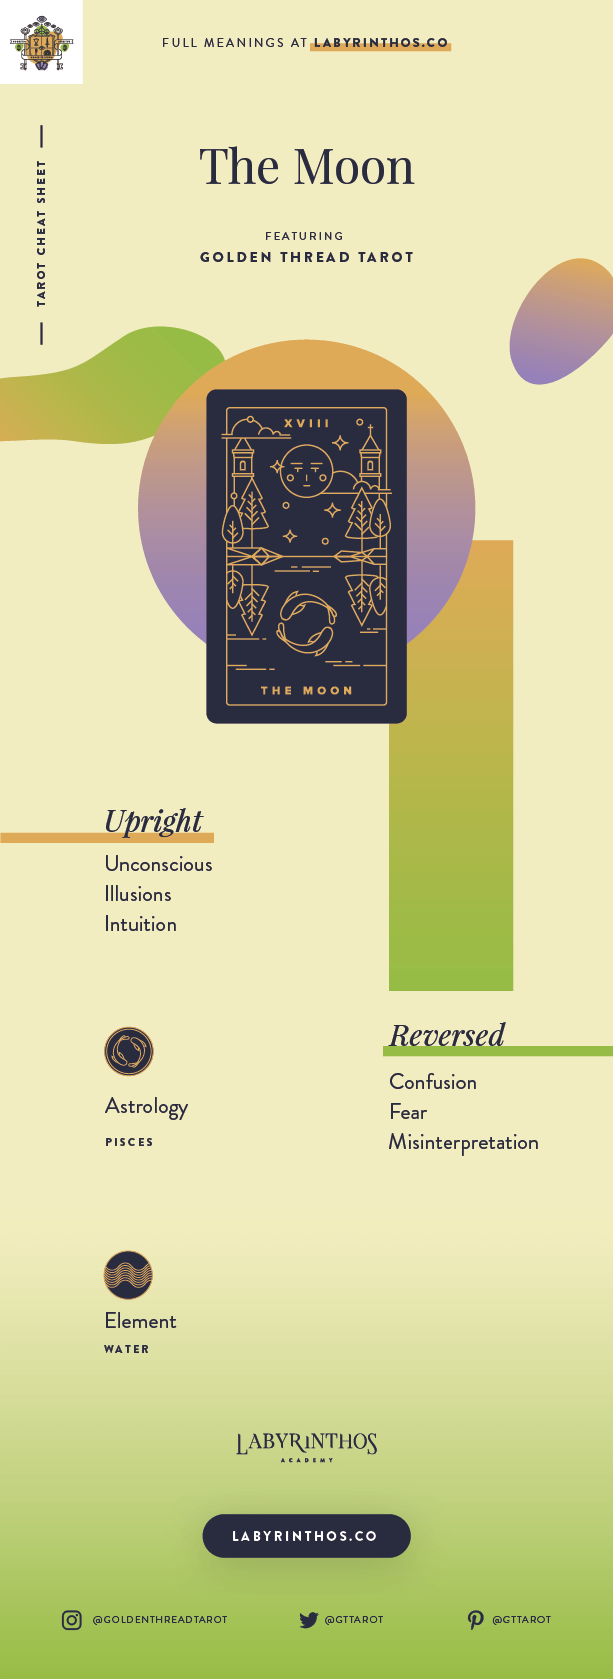 Meaning of the Moon Card in Tarot